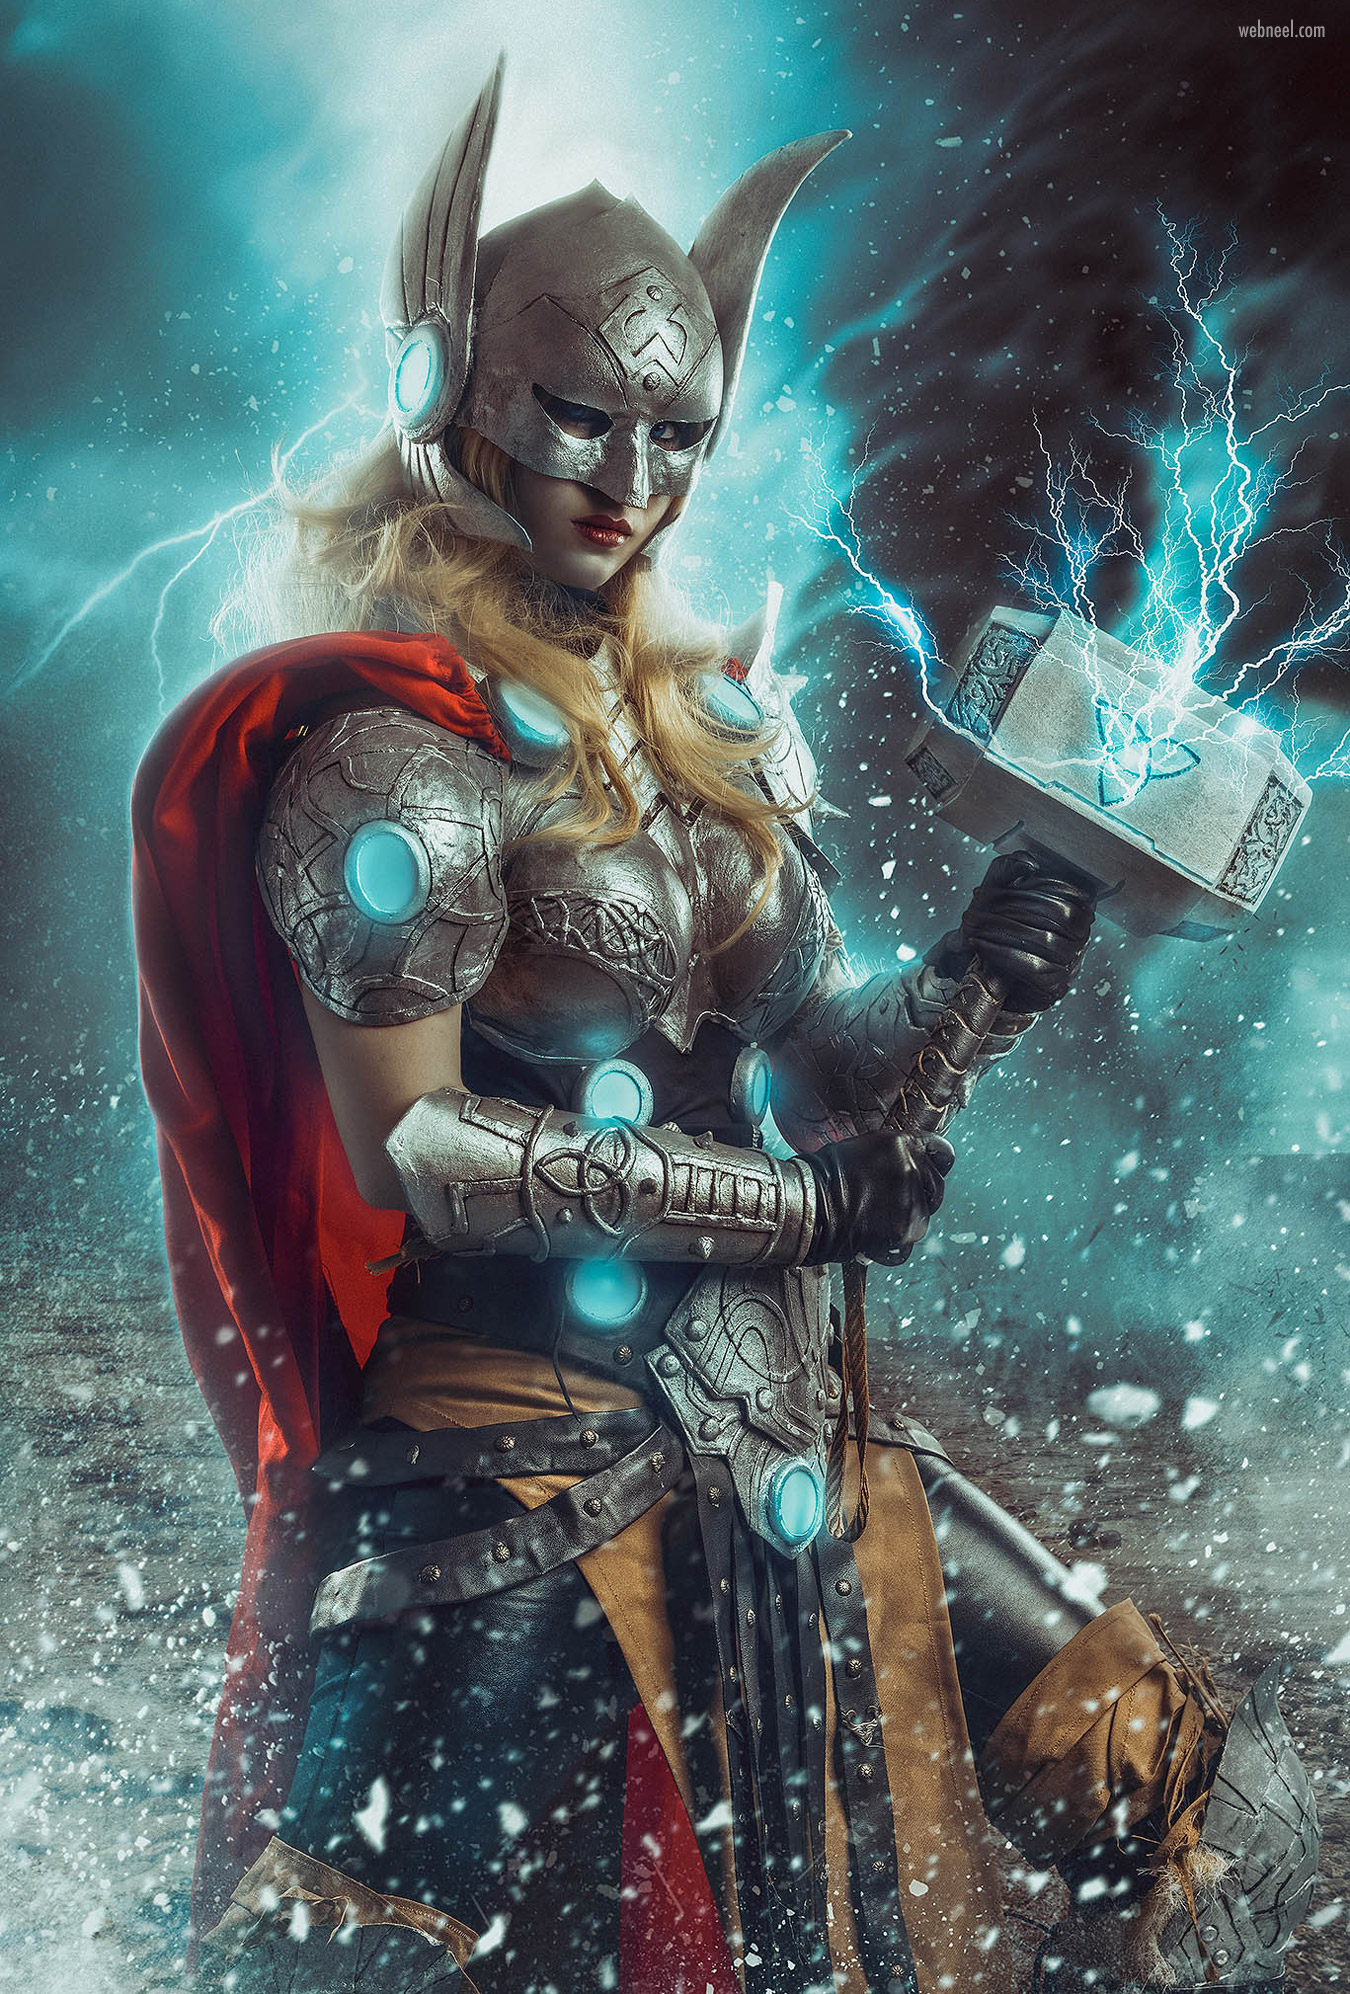 photo retouching works coplay photography thor by rebecca saray